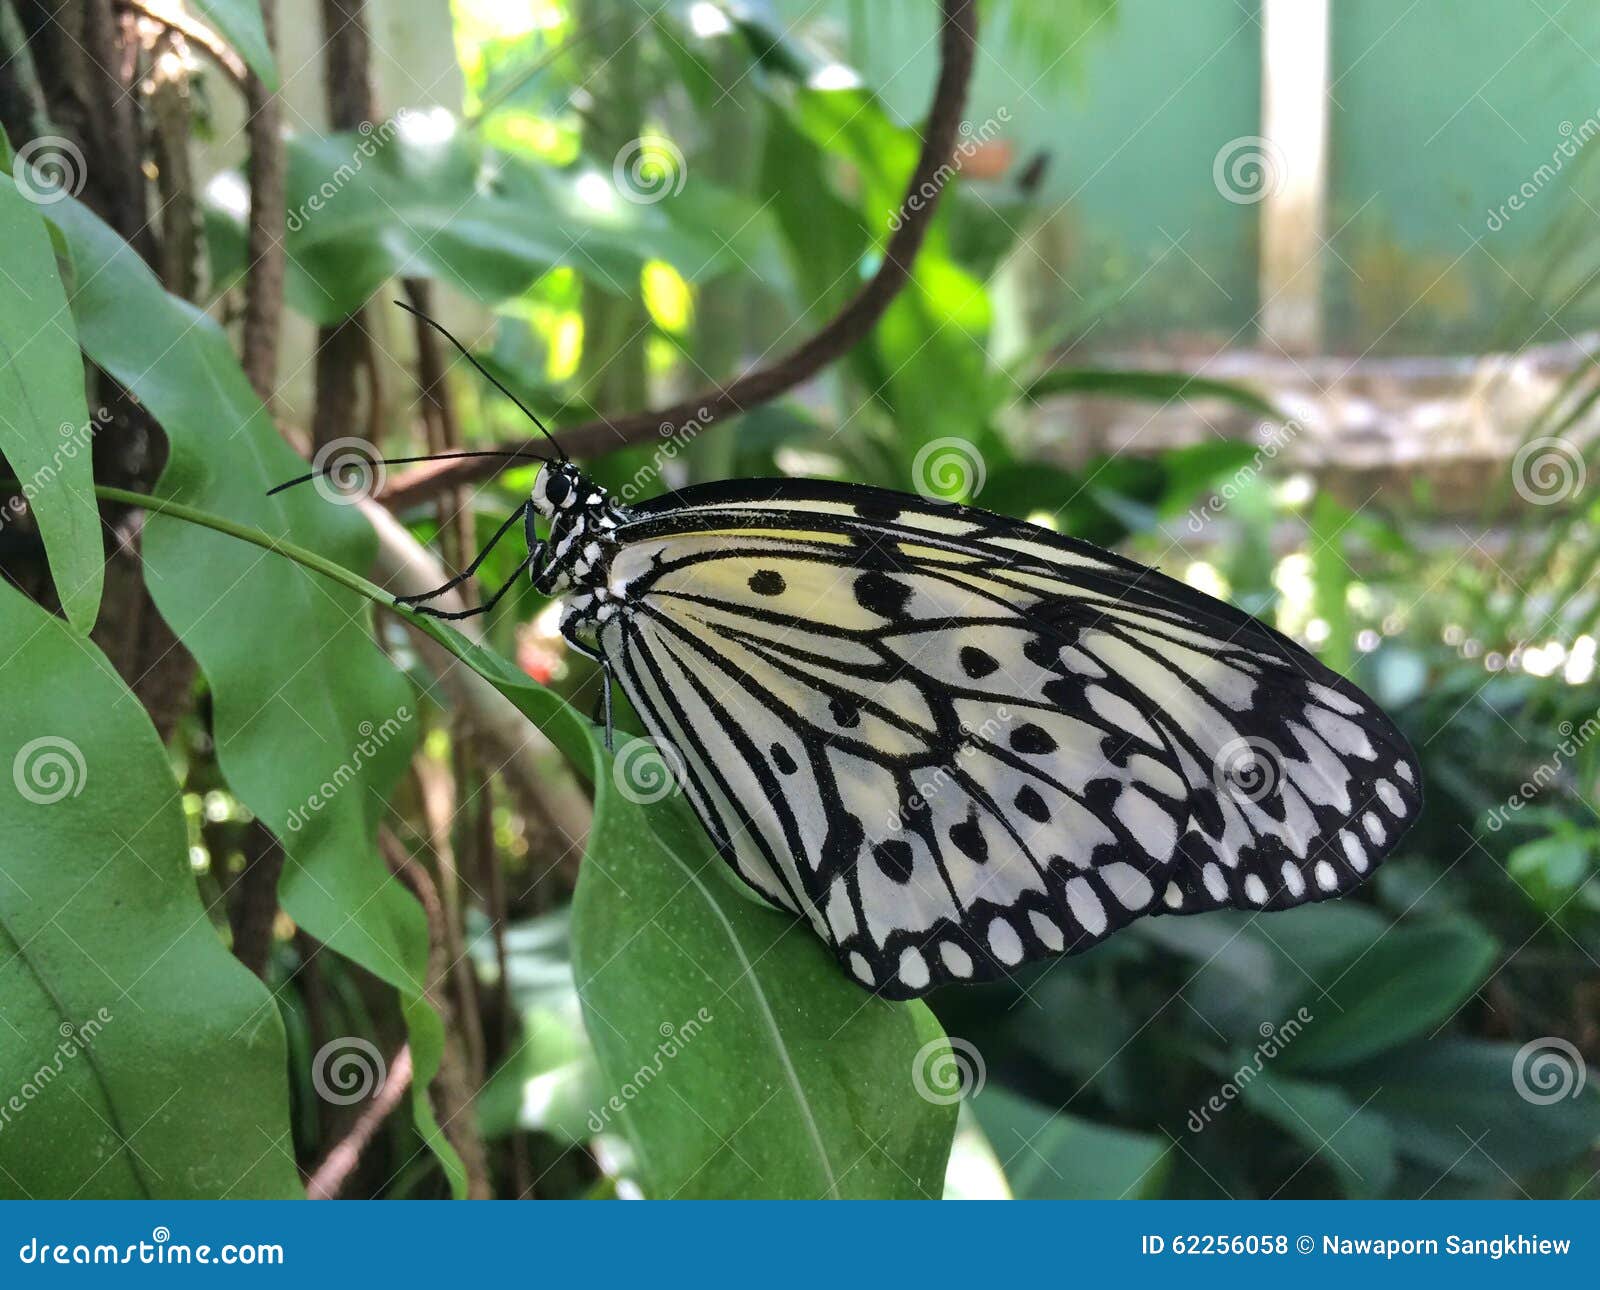 Butterfly stock photo. Image of portrait, creature, leaf - 62256058